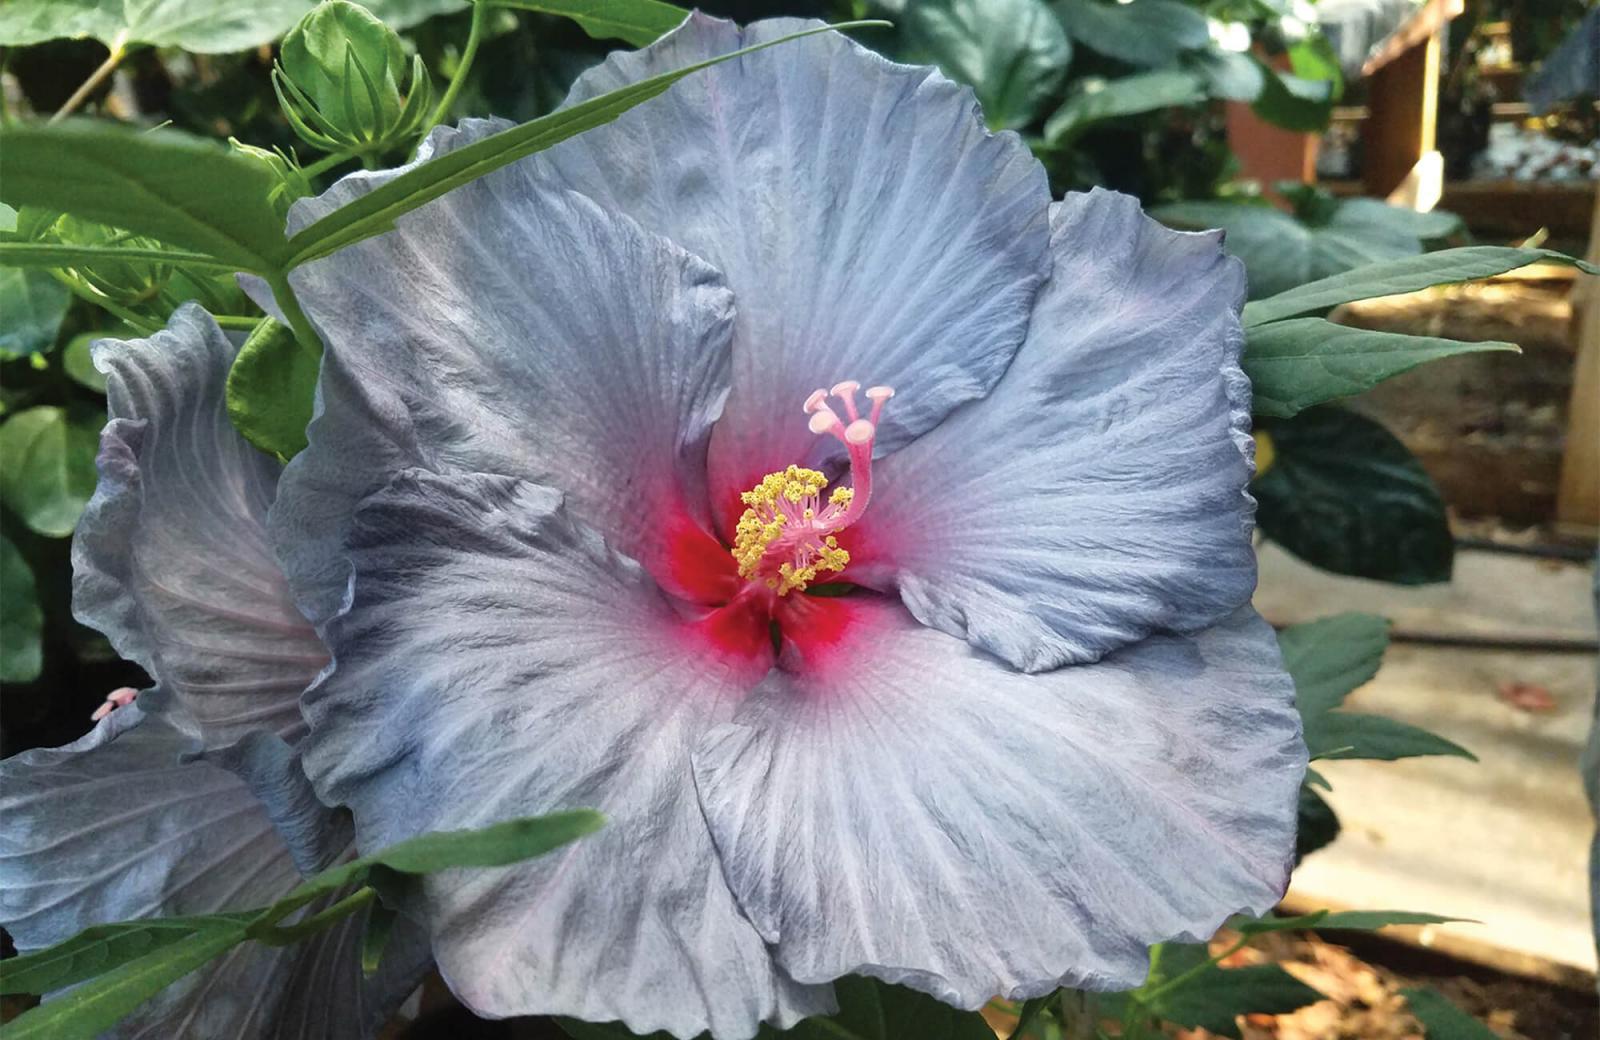 Crossing a new frontier in hardy hibiscus breeding